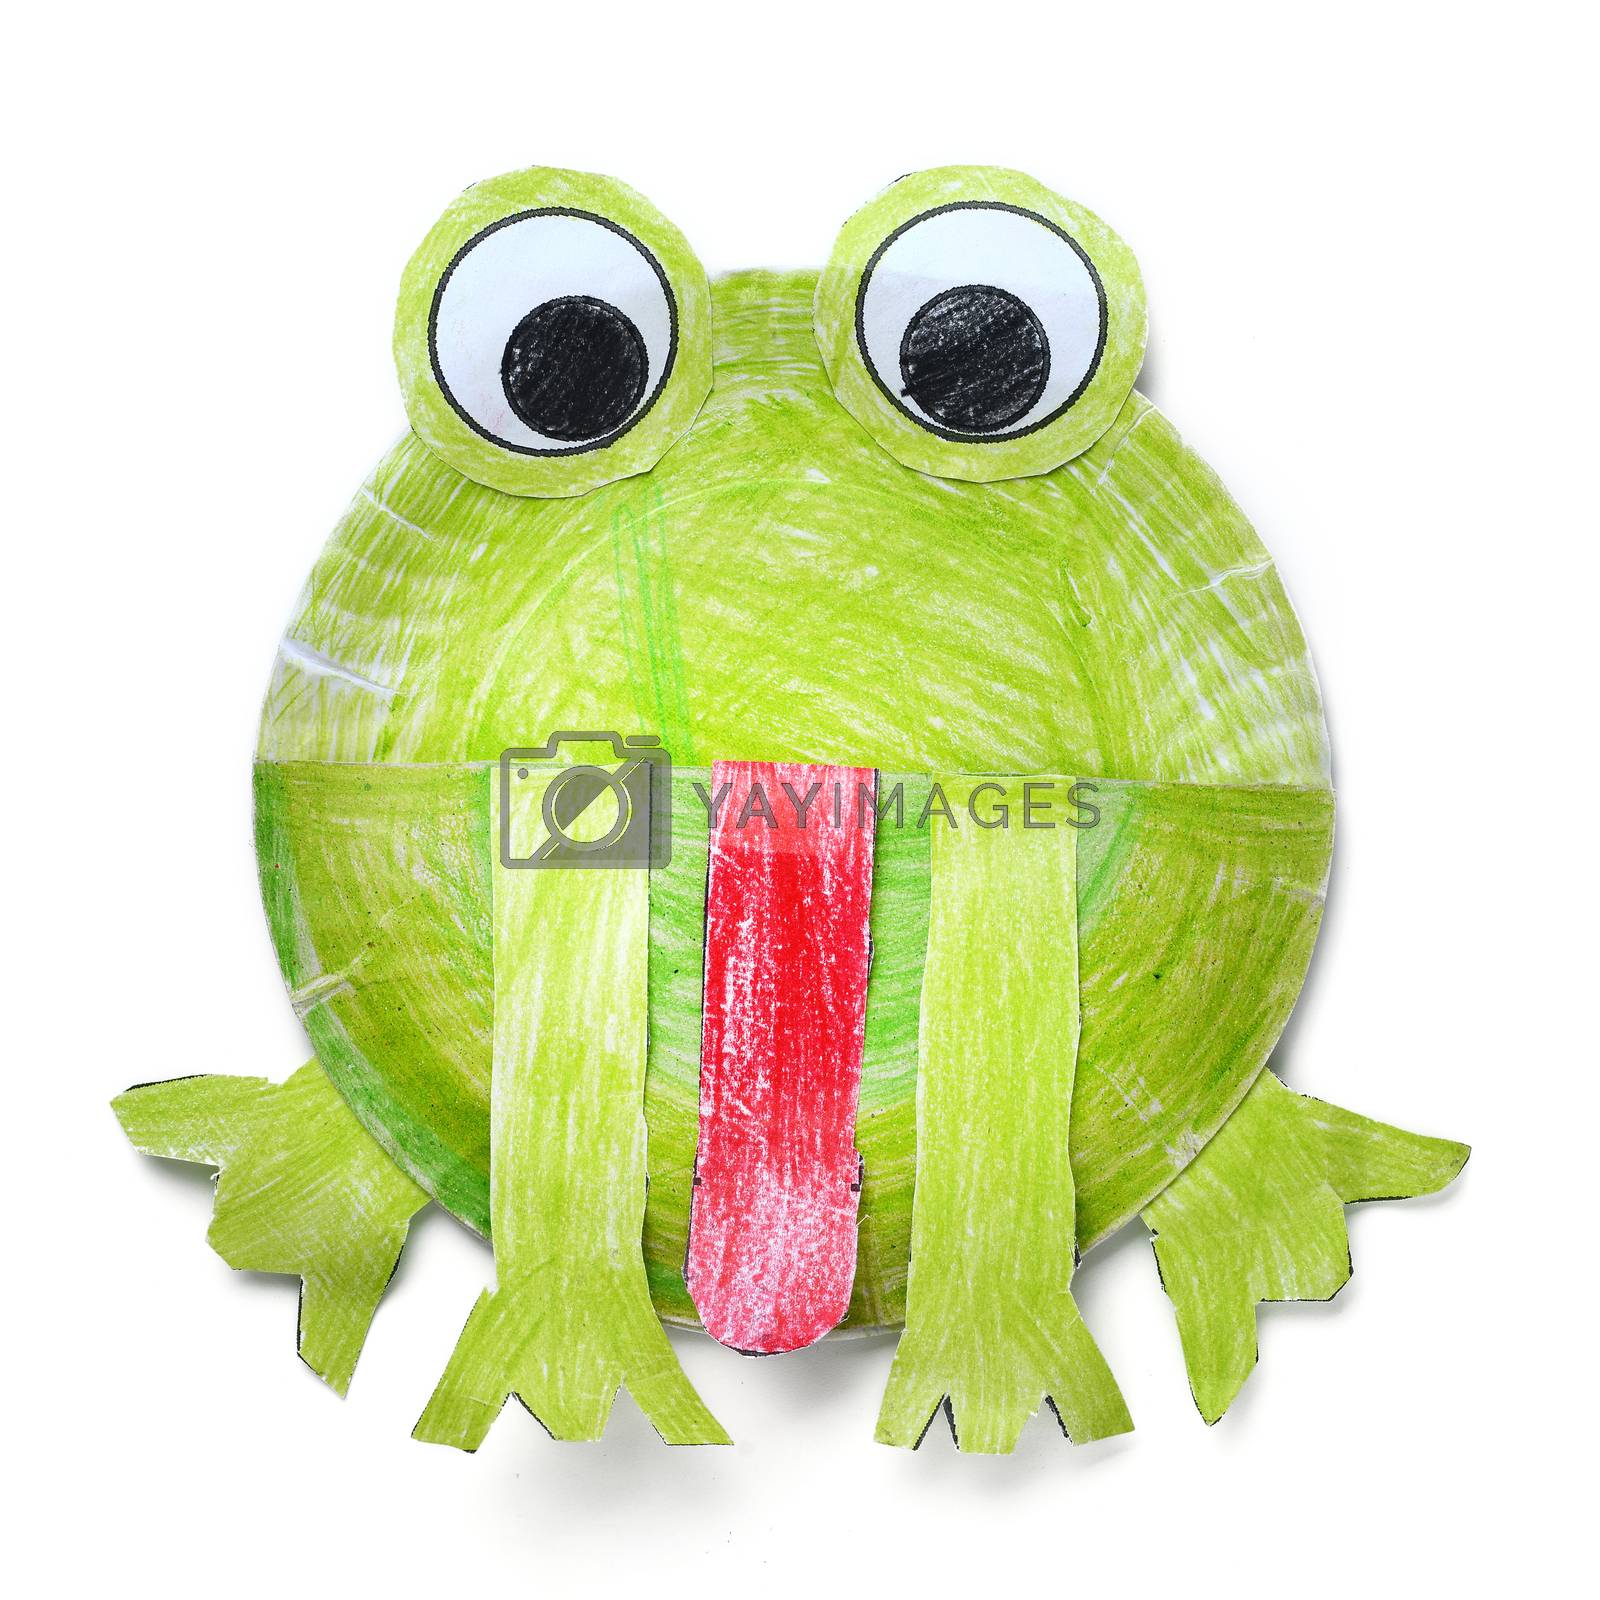 Royalty free image of paper frog by antpkr